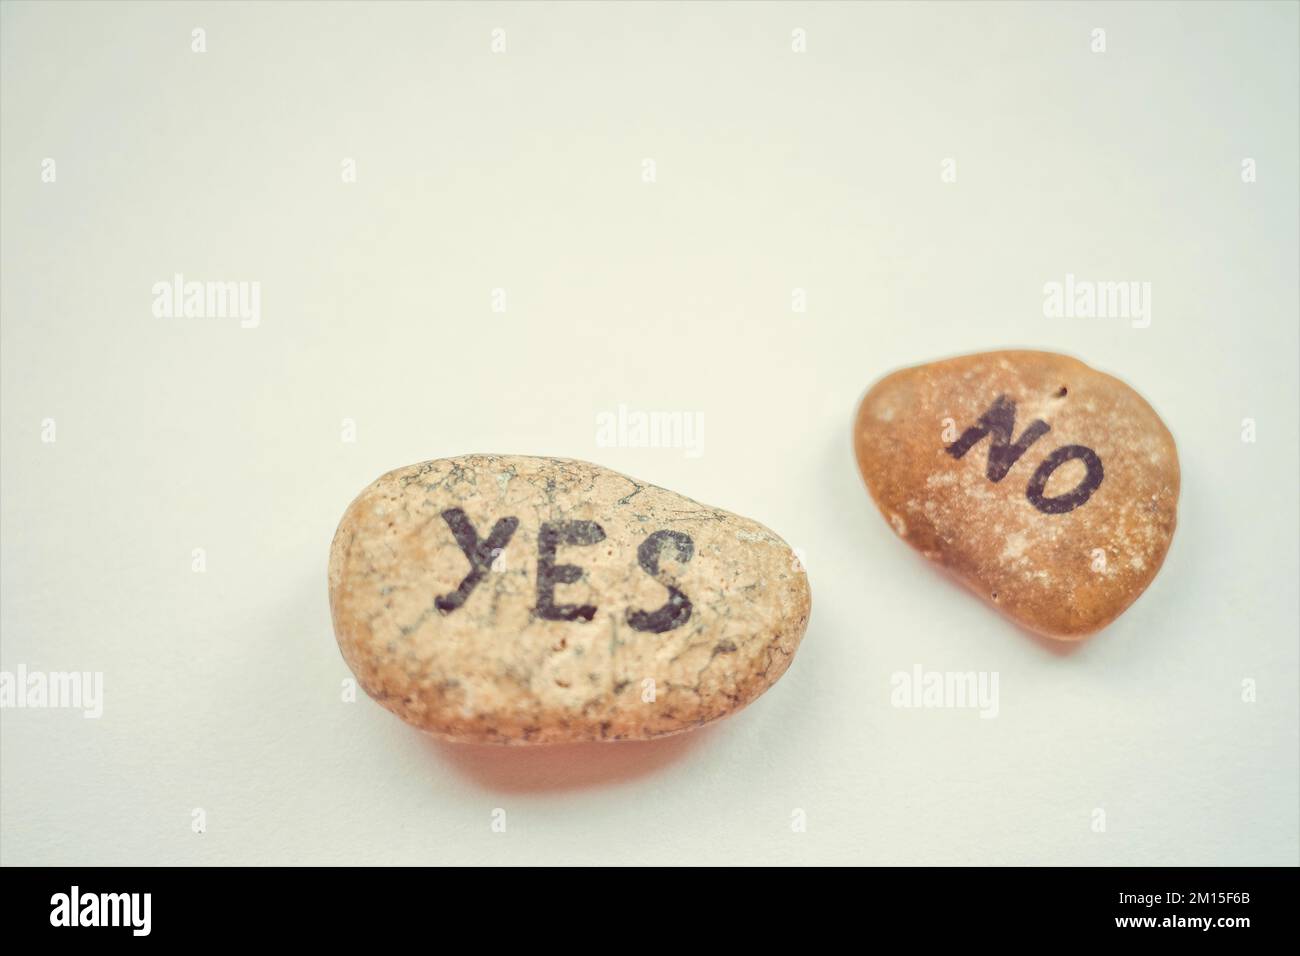 Two grey pebbles with the text yes and no on a blue table Stock Photo